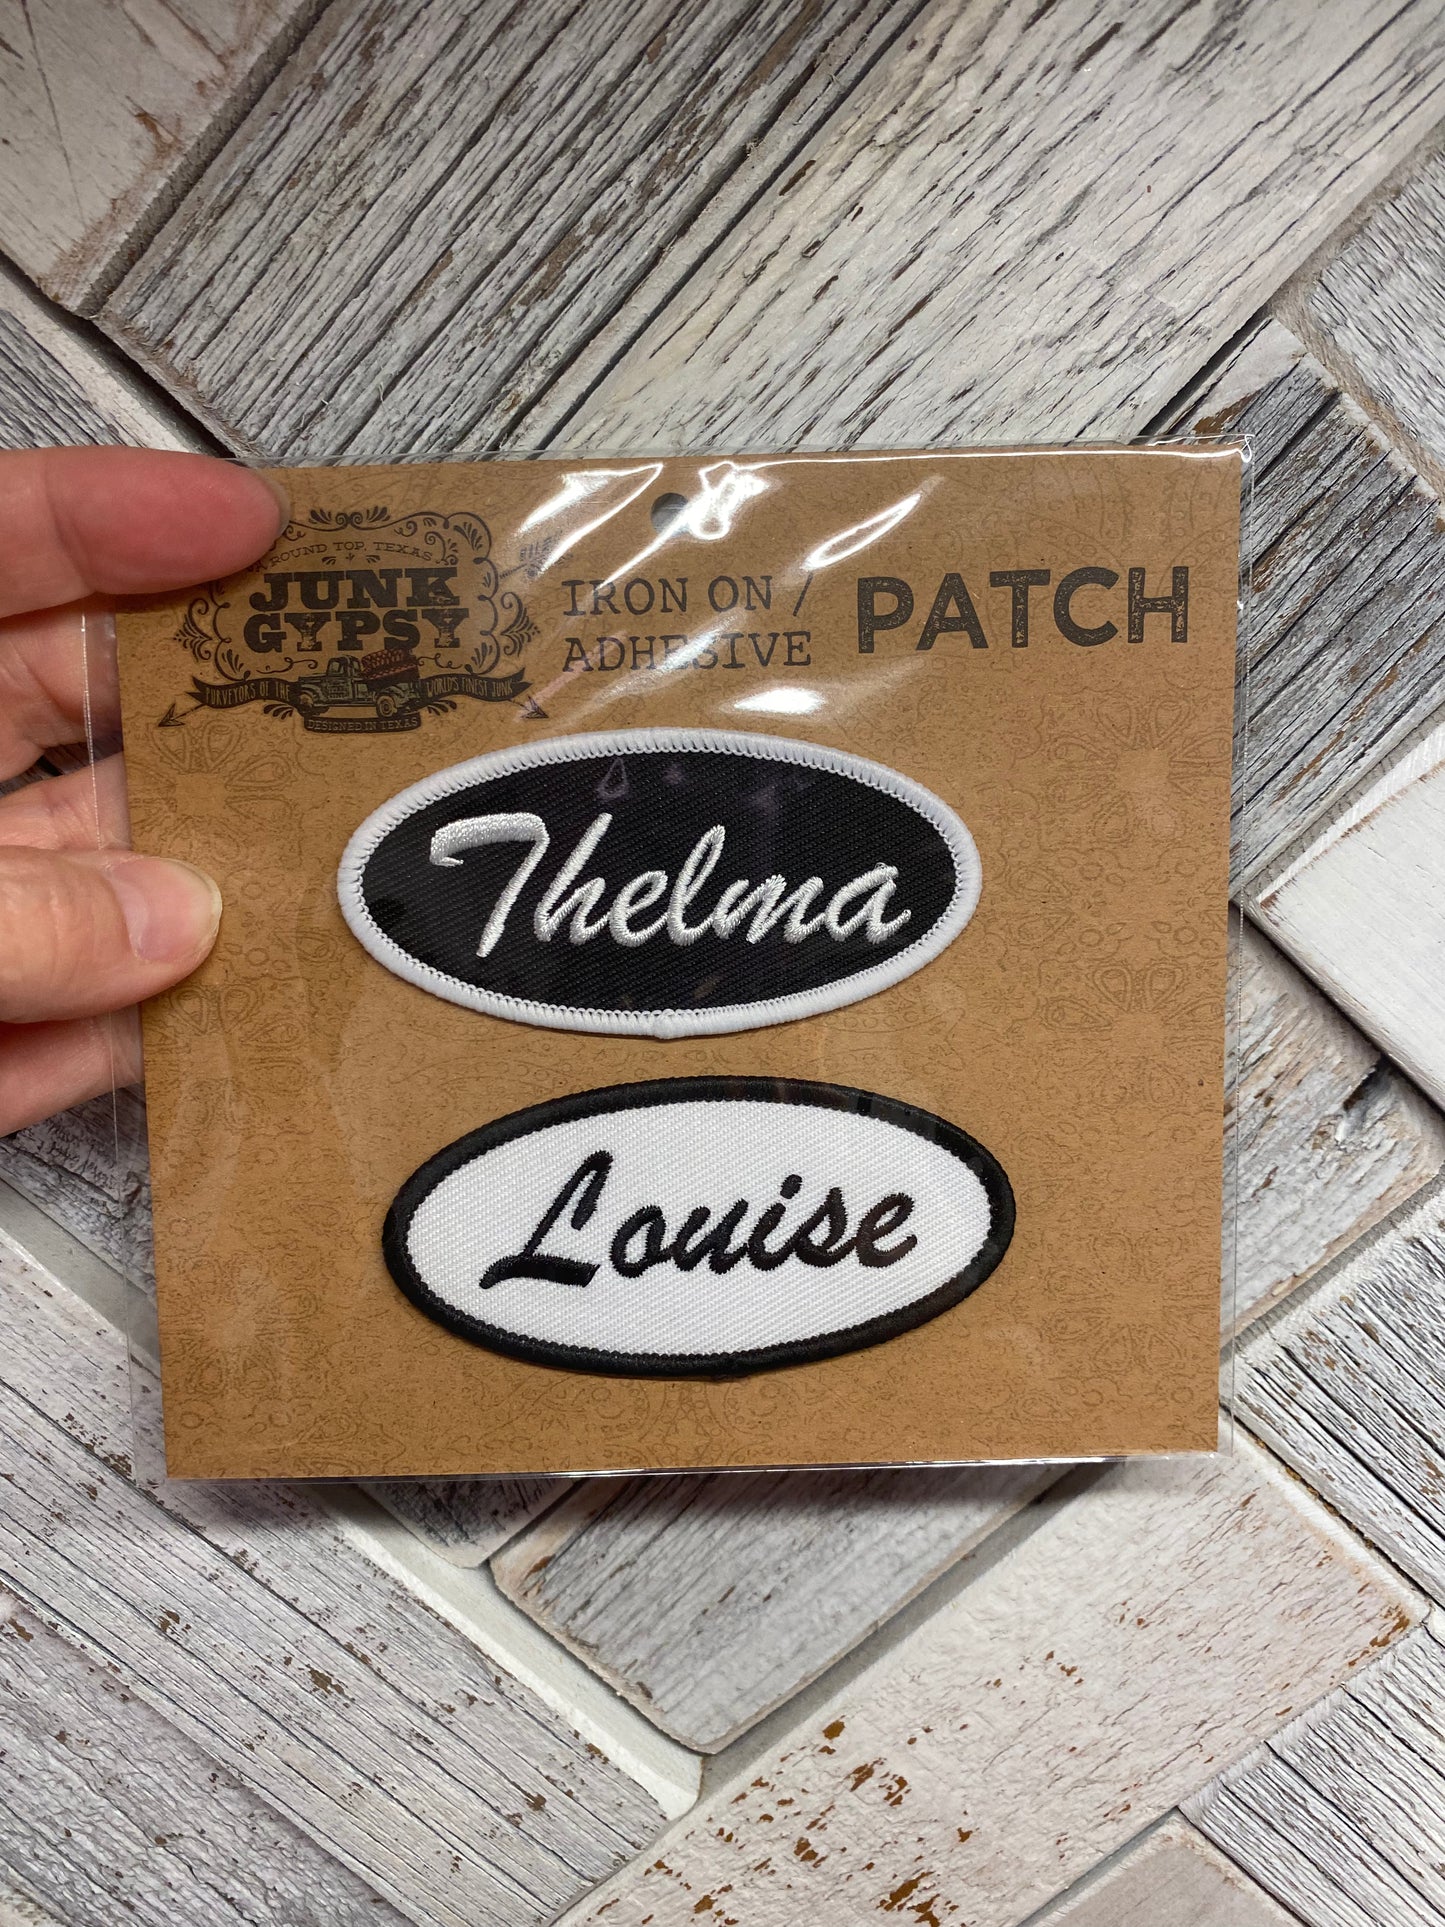 Couple patches